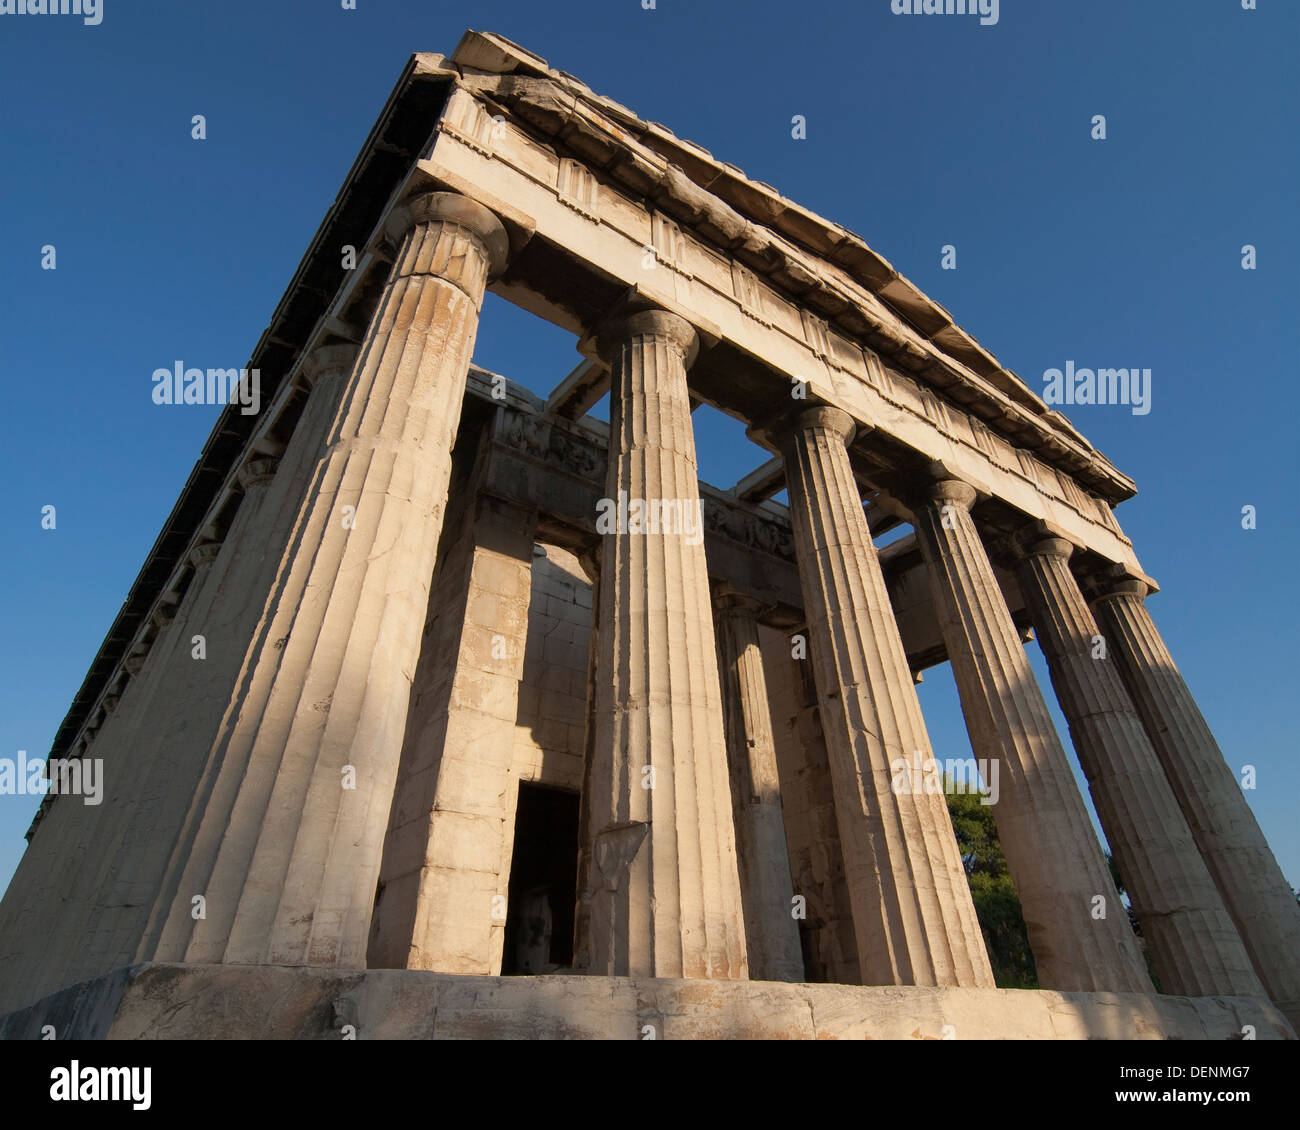 The well-preserved temple of Hephaestus in the Ancient Agora of Athens, Greece. Stock Photo